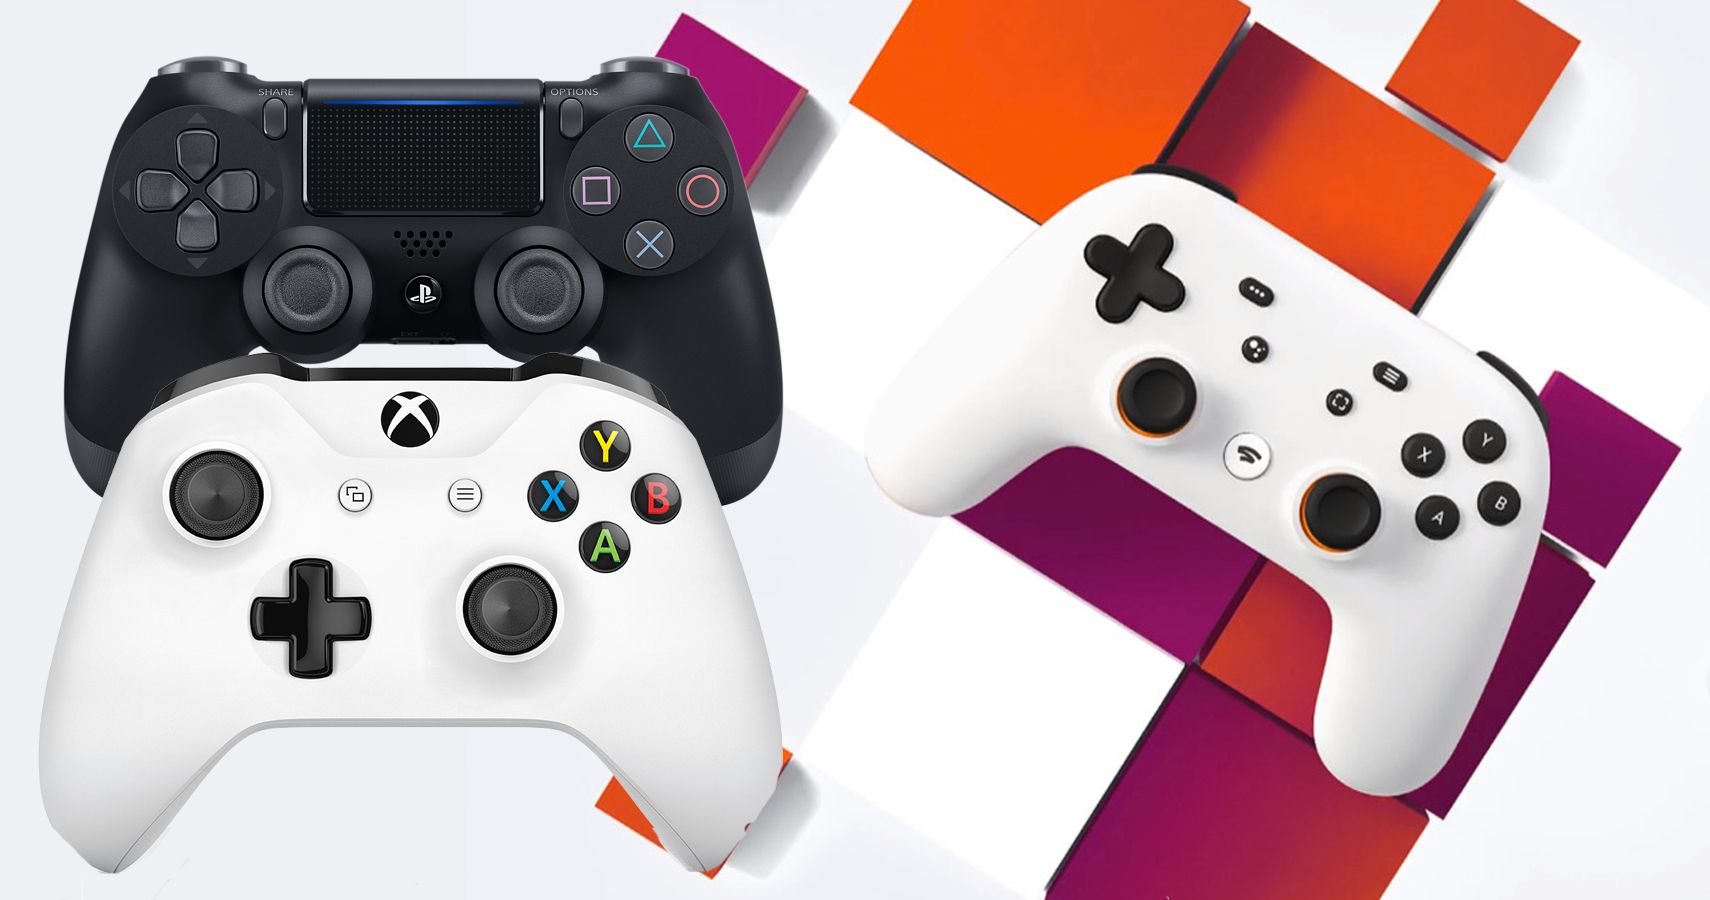 Monetære Hælde Vanding Stadia Will Be More Powerful Than Xbox One And PS4 Combined, Says Google